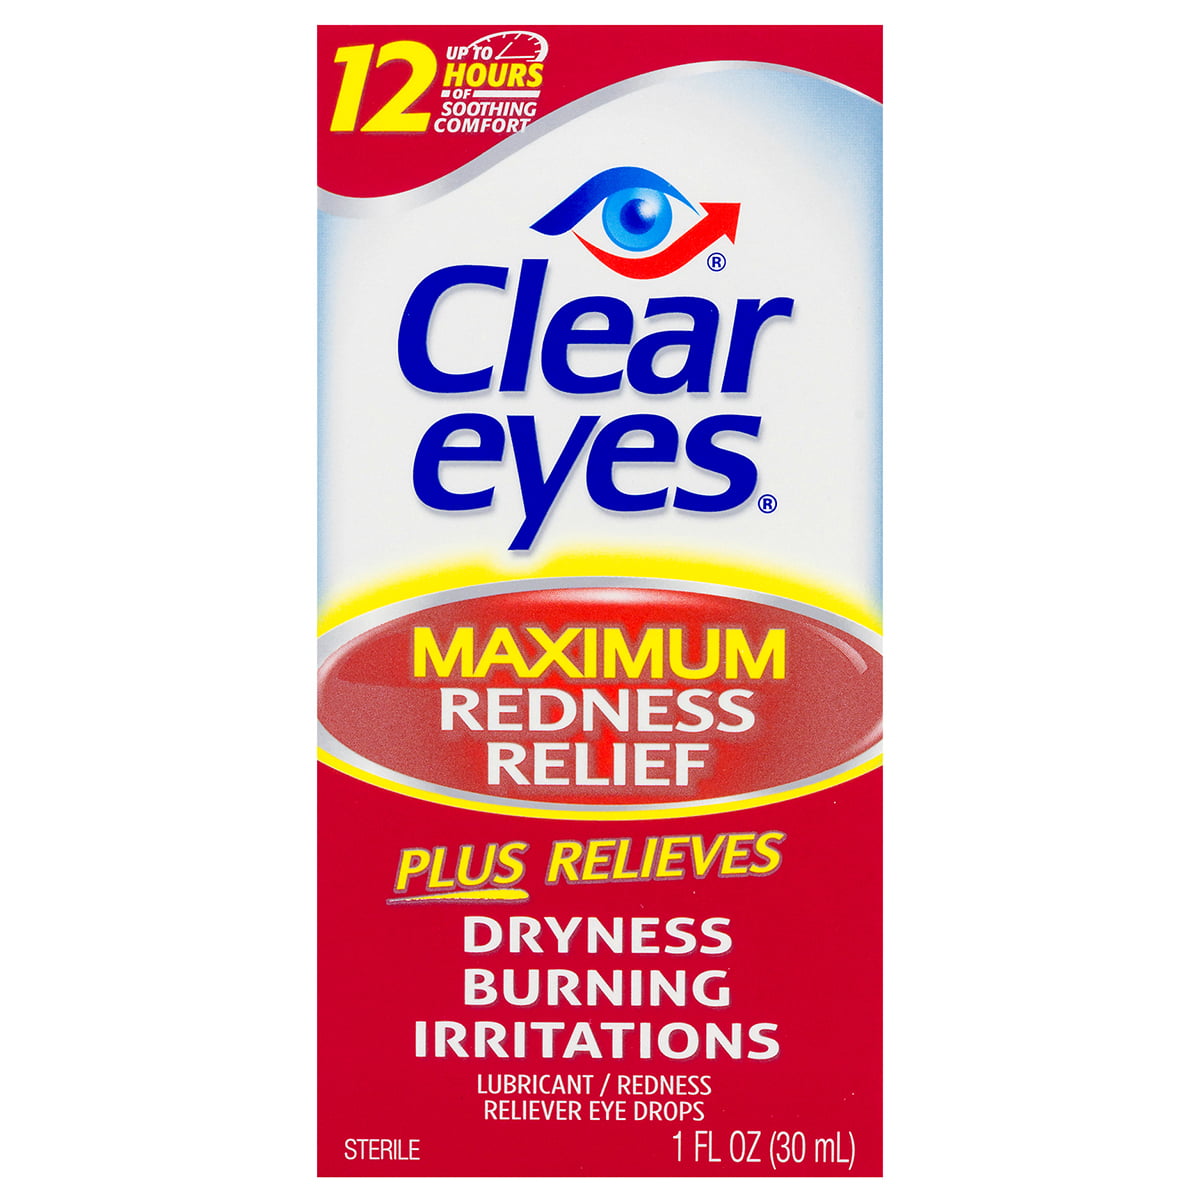 Clear eyes speed. Clear Eyes. Max strength redness Reliever Lubricant Eye Drops. Clear Eyes купить. Clean Eyes maximum redness купить.